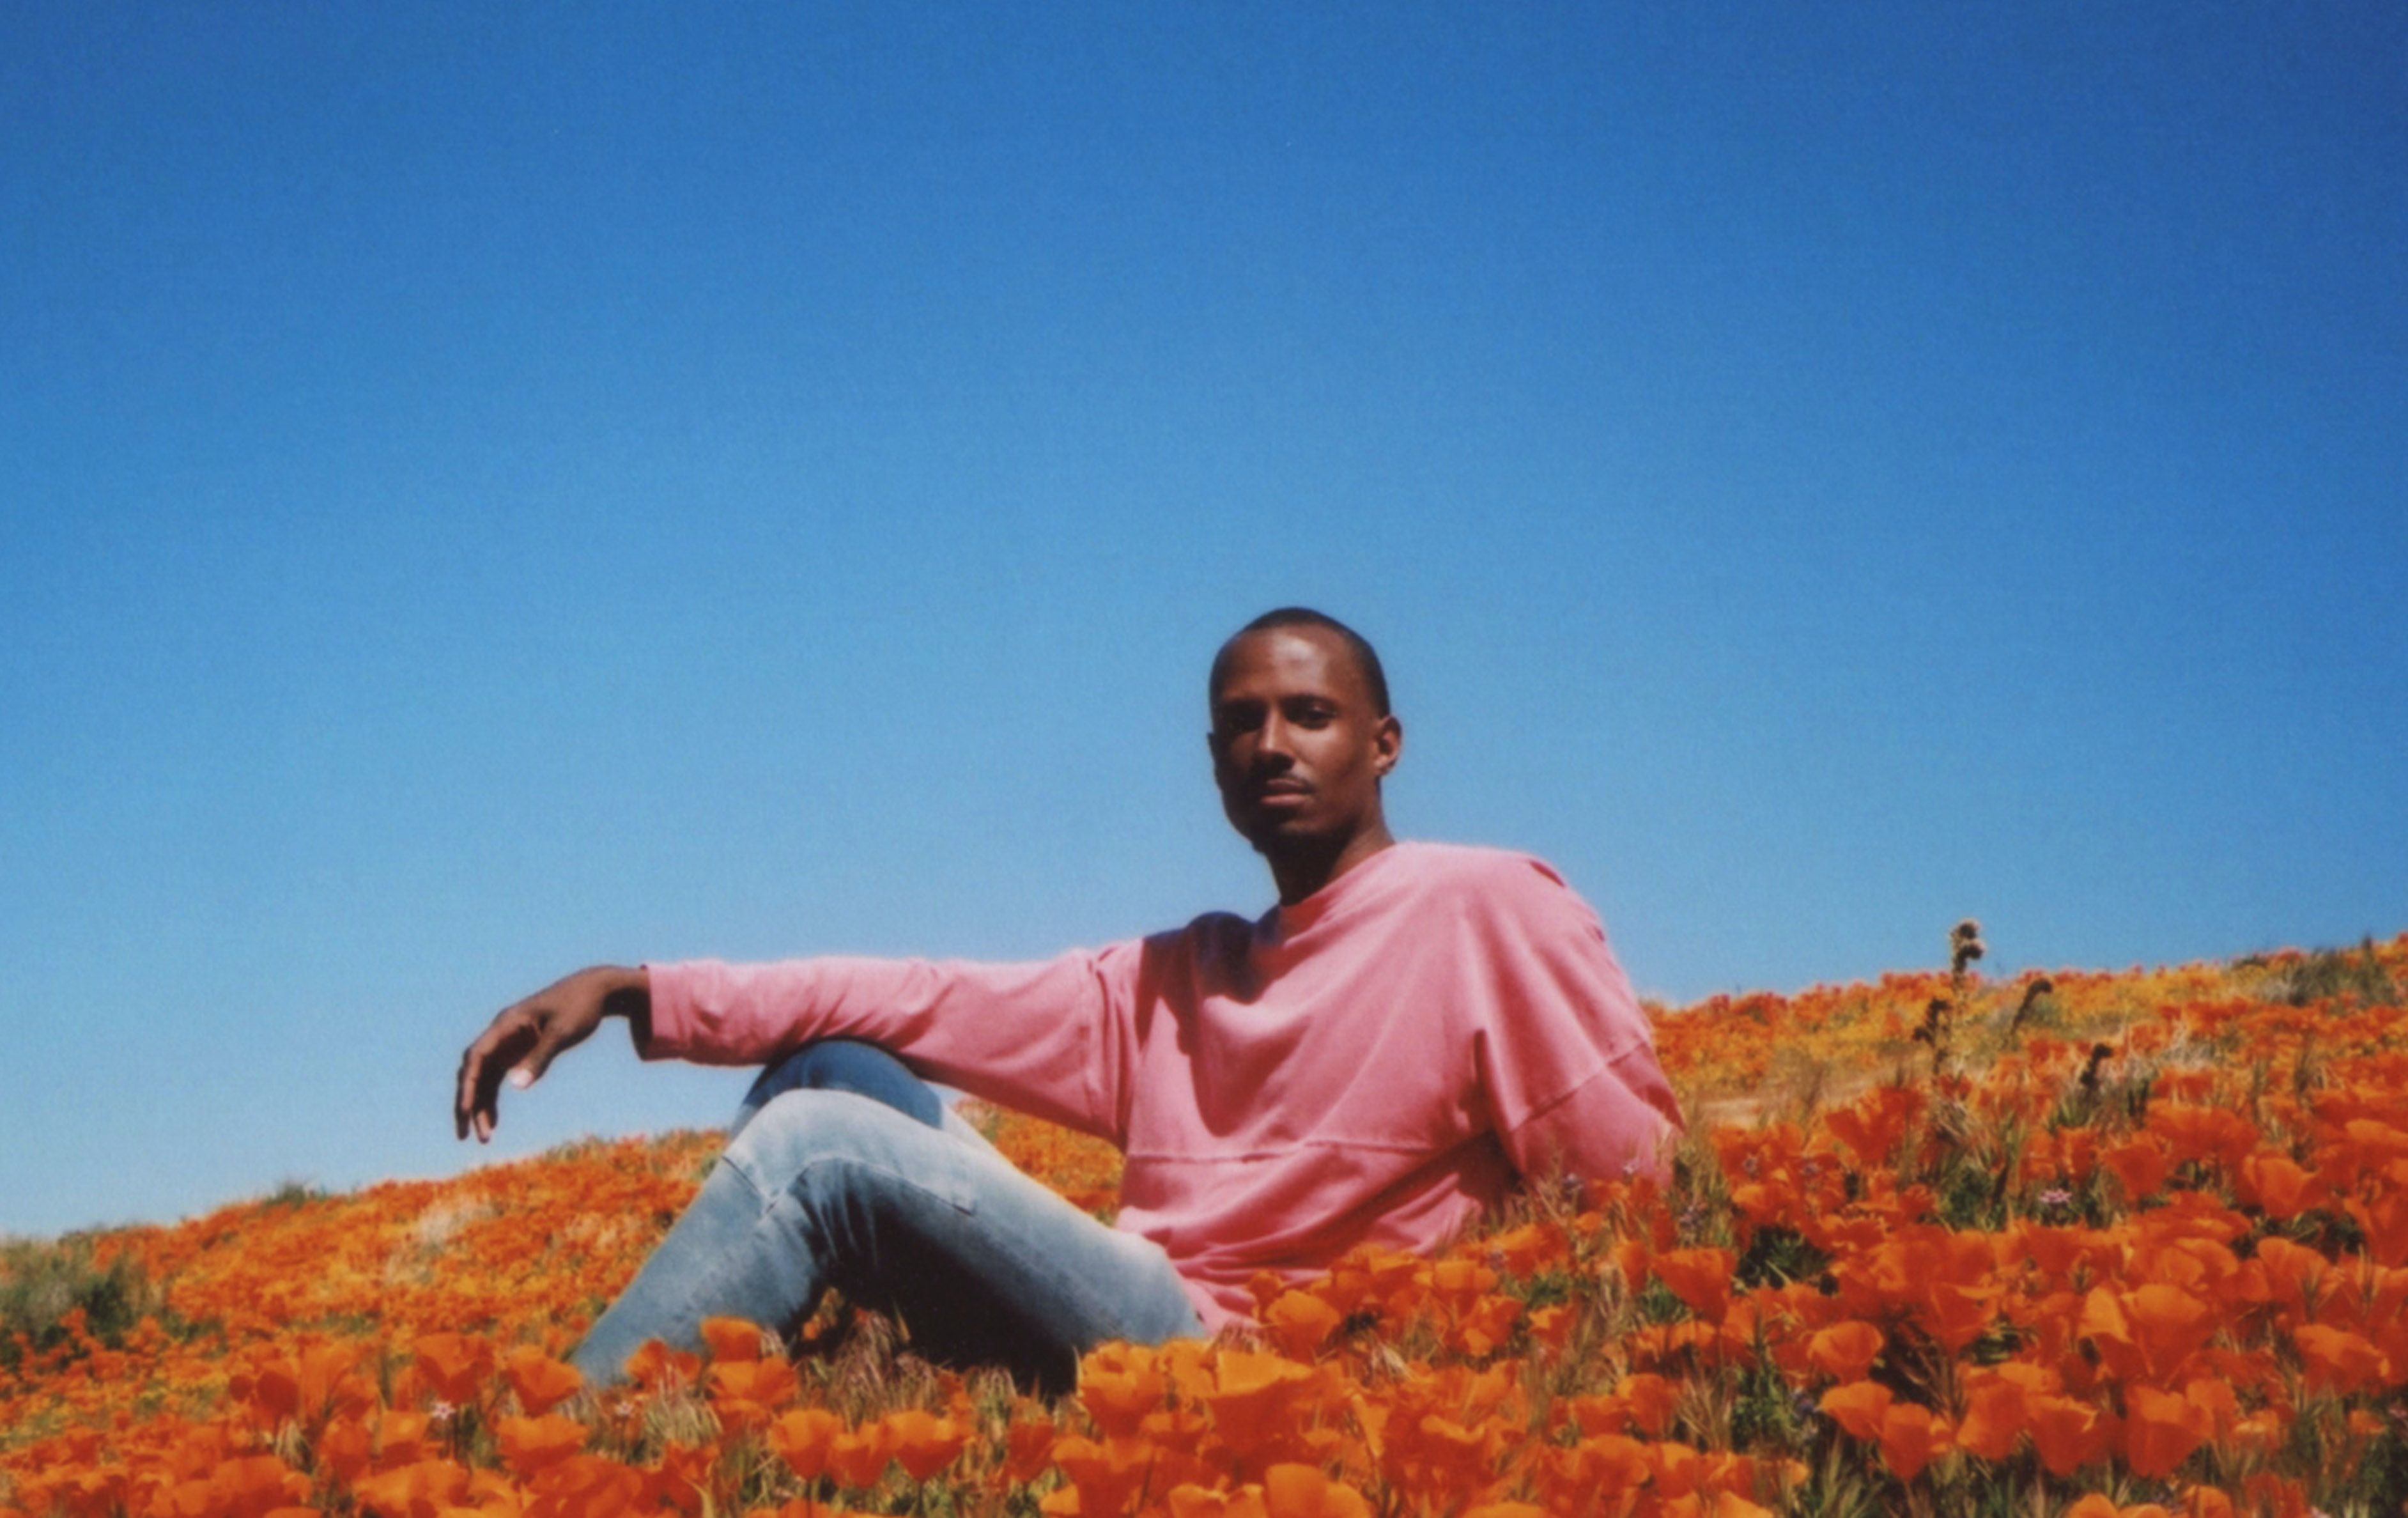 2019. This is my friend Anthony in a field of California poppies during an early spring bloom. 